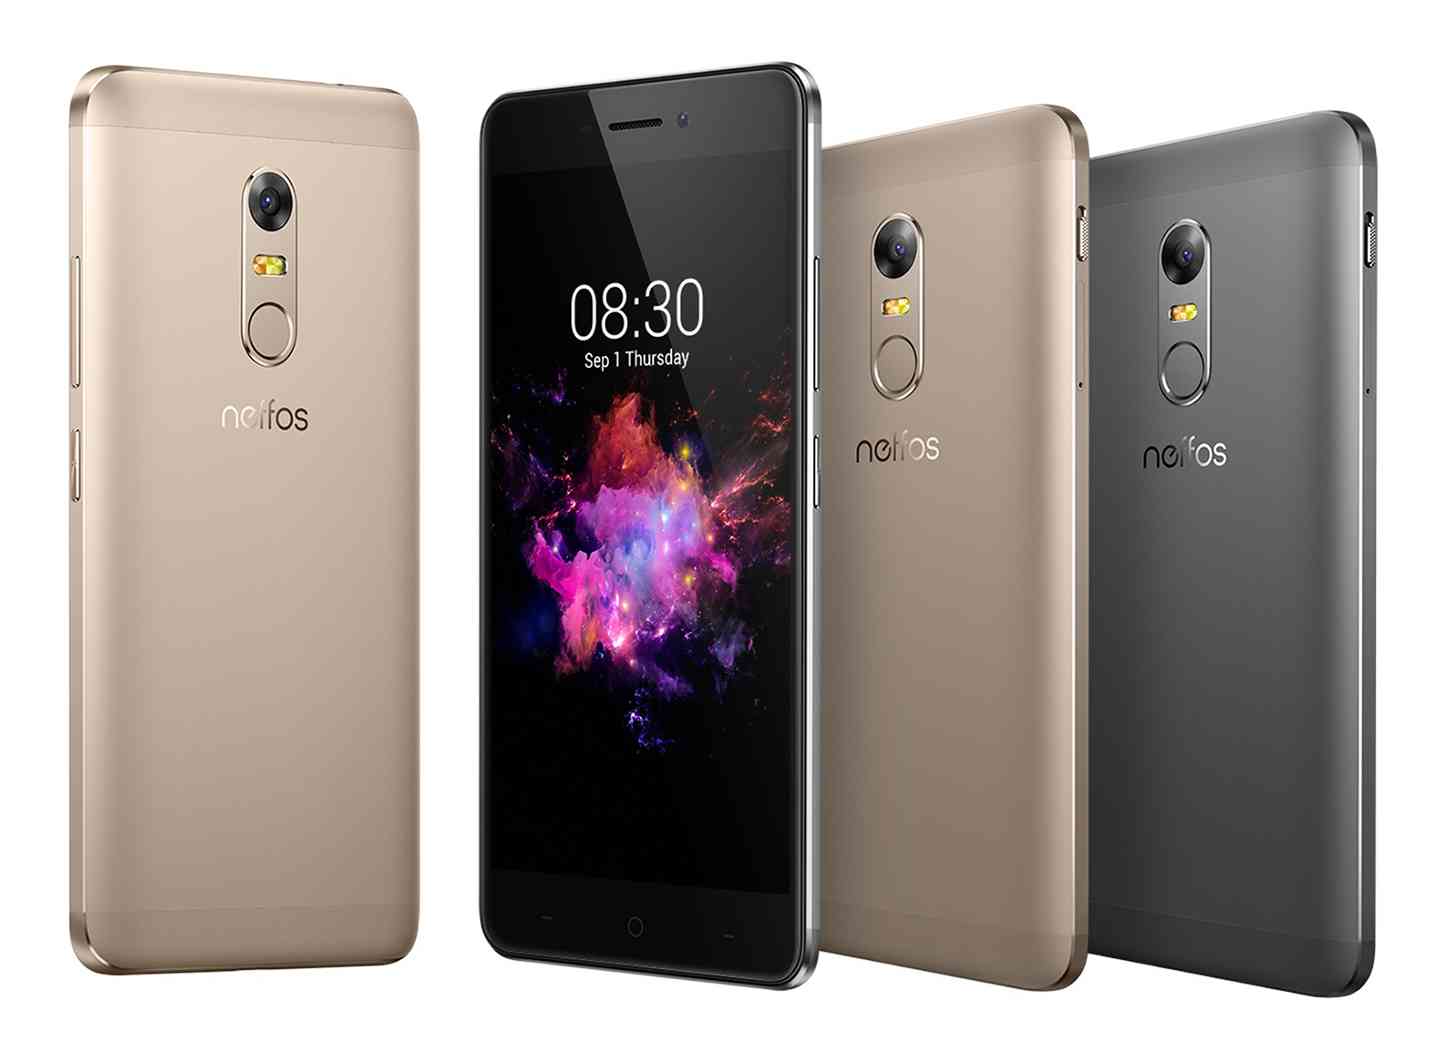 TP-Link Neffos X1 phones official